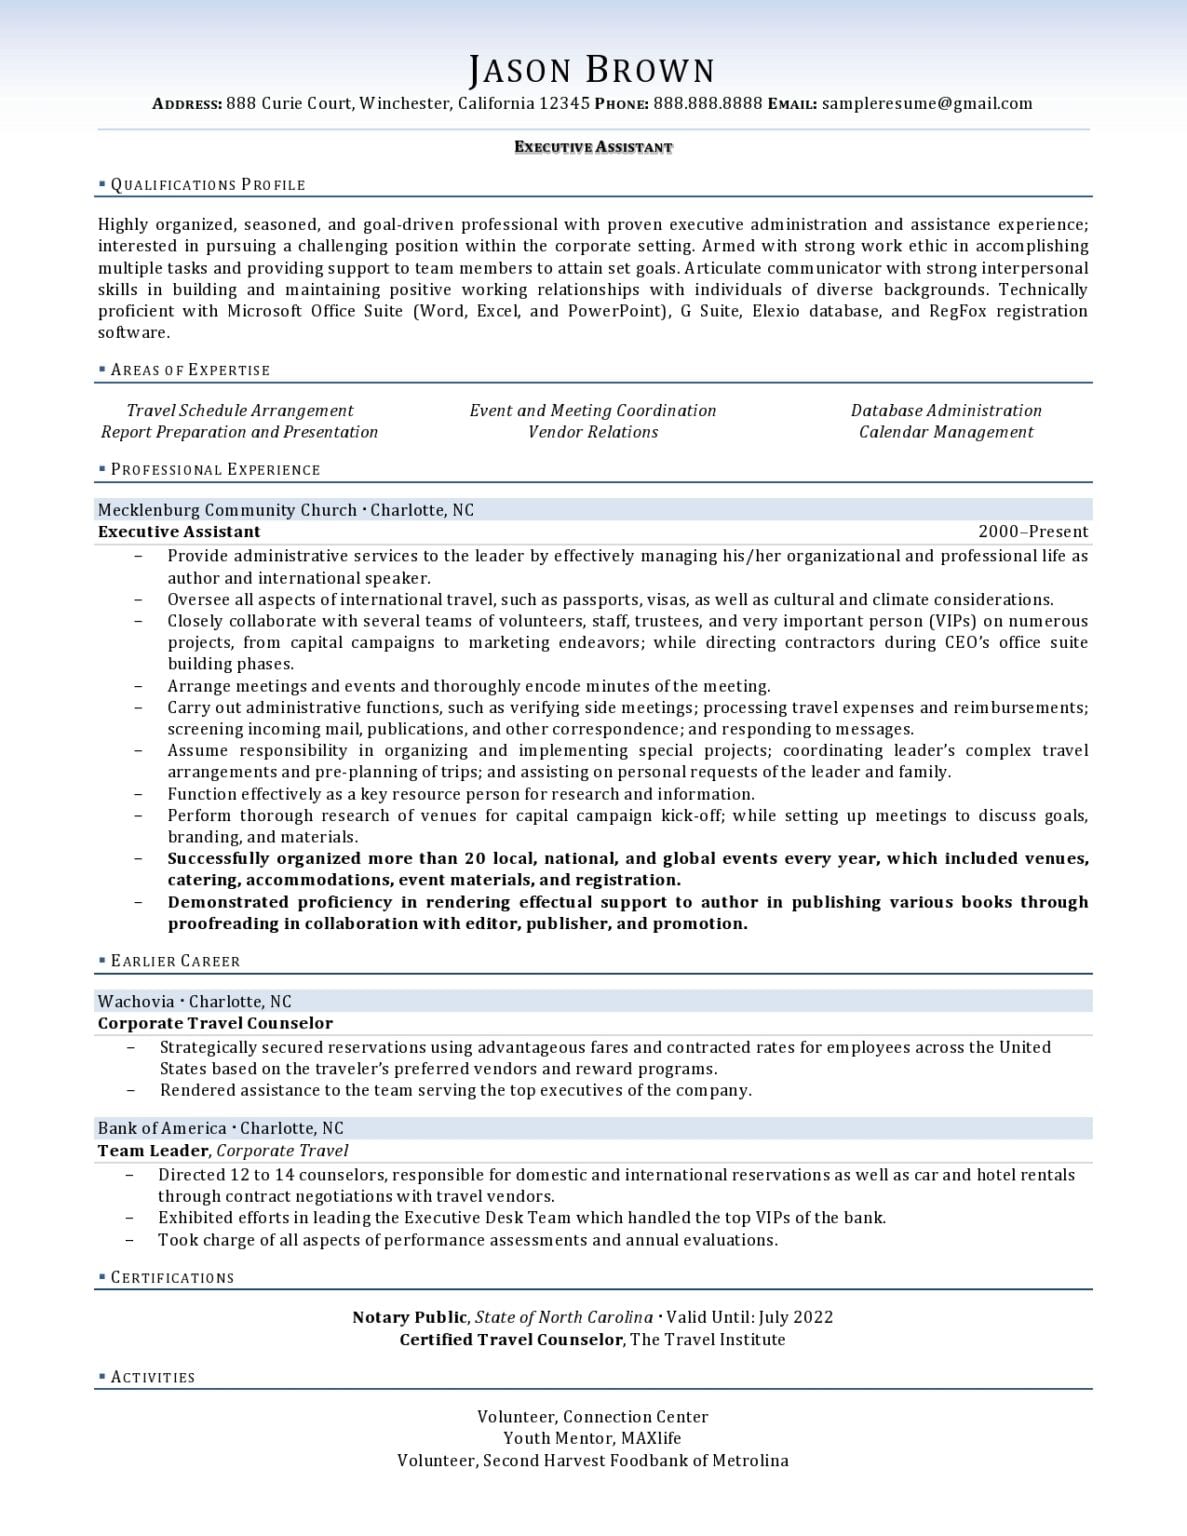 resume sample executive assistant